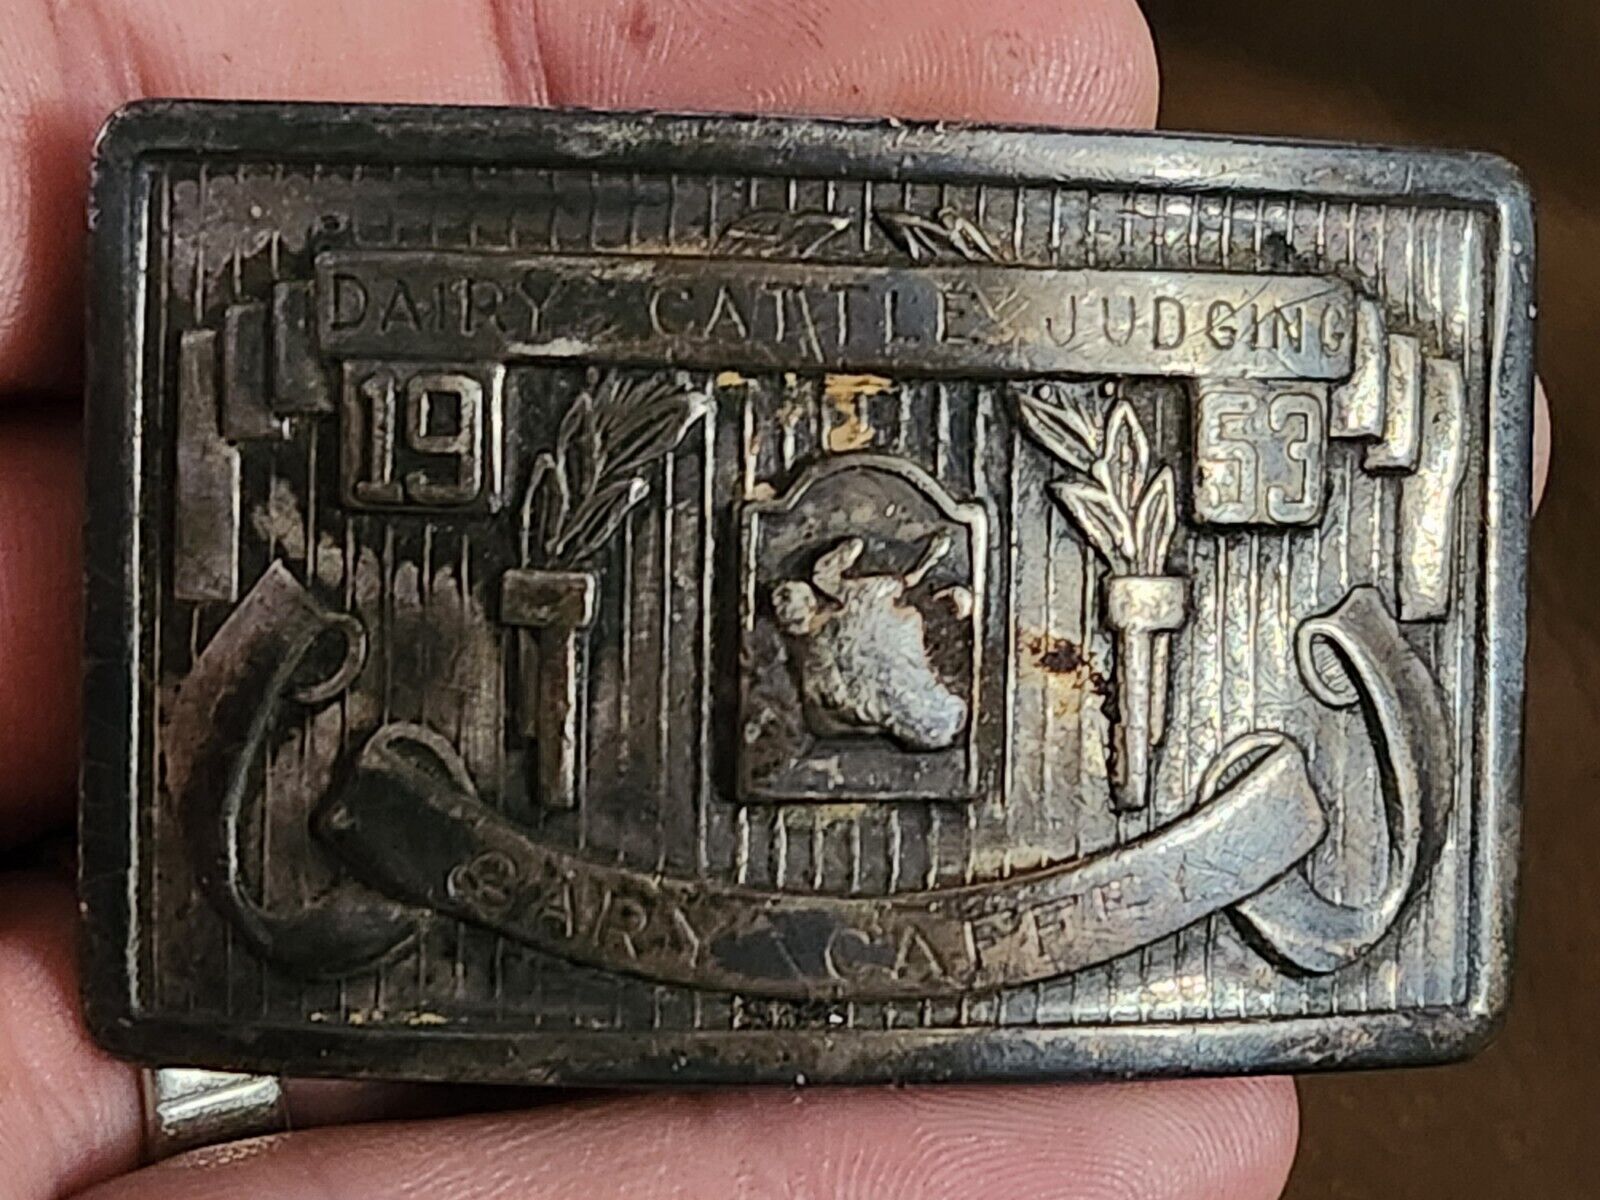 Sterling Silver 62 Grams 1953 Dairy Cattle Judging Belt Buckle Gary Caffry